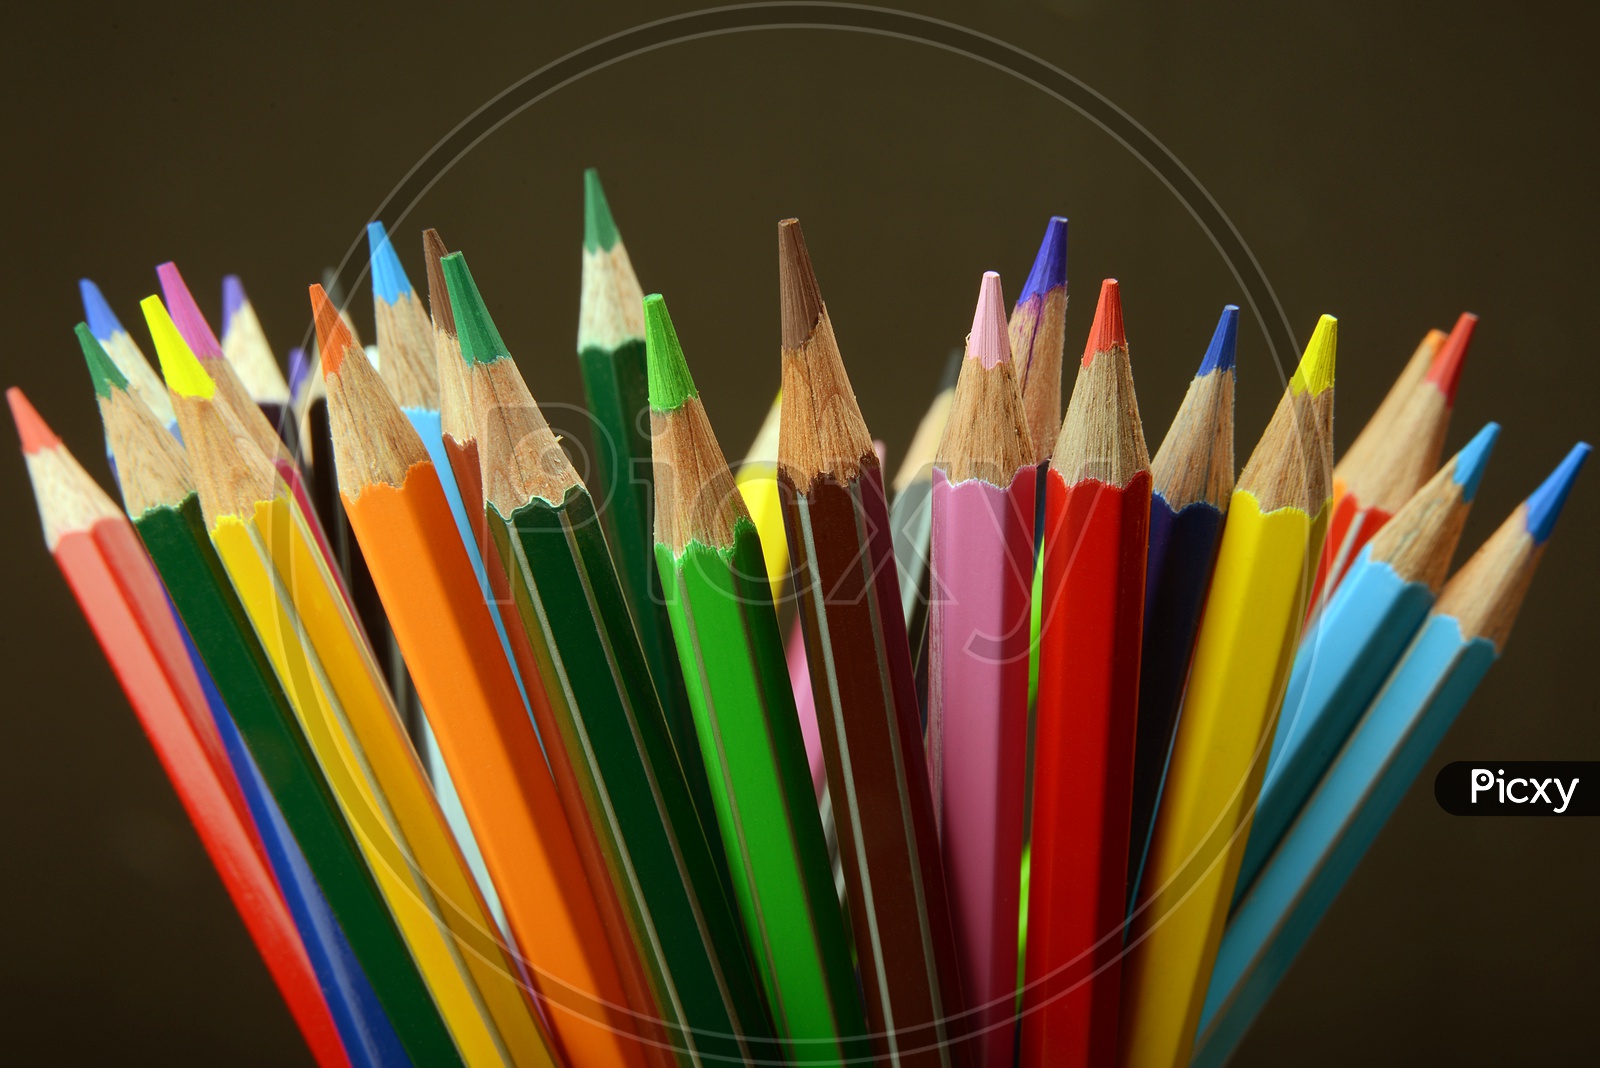 Artist color pencils, for students and upcoming artists